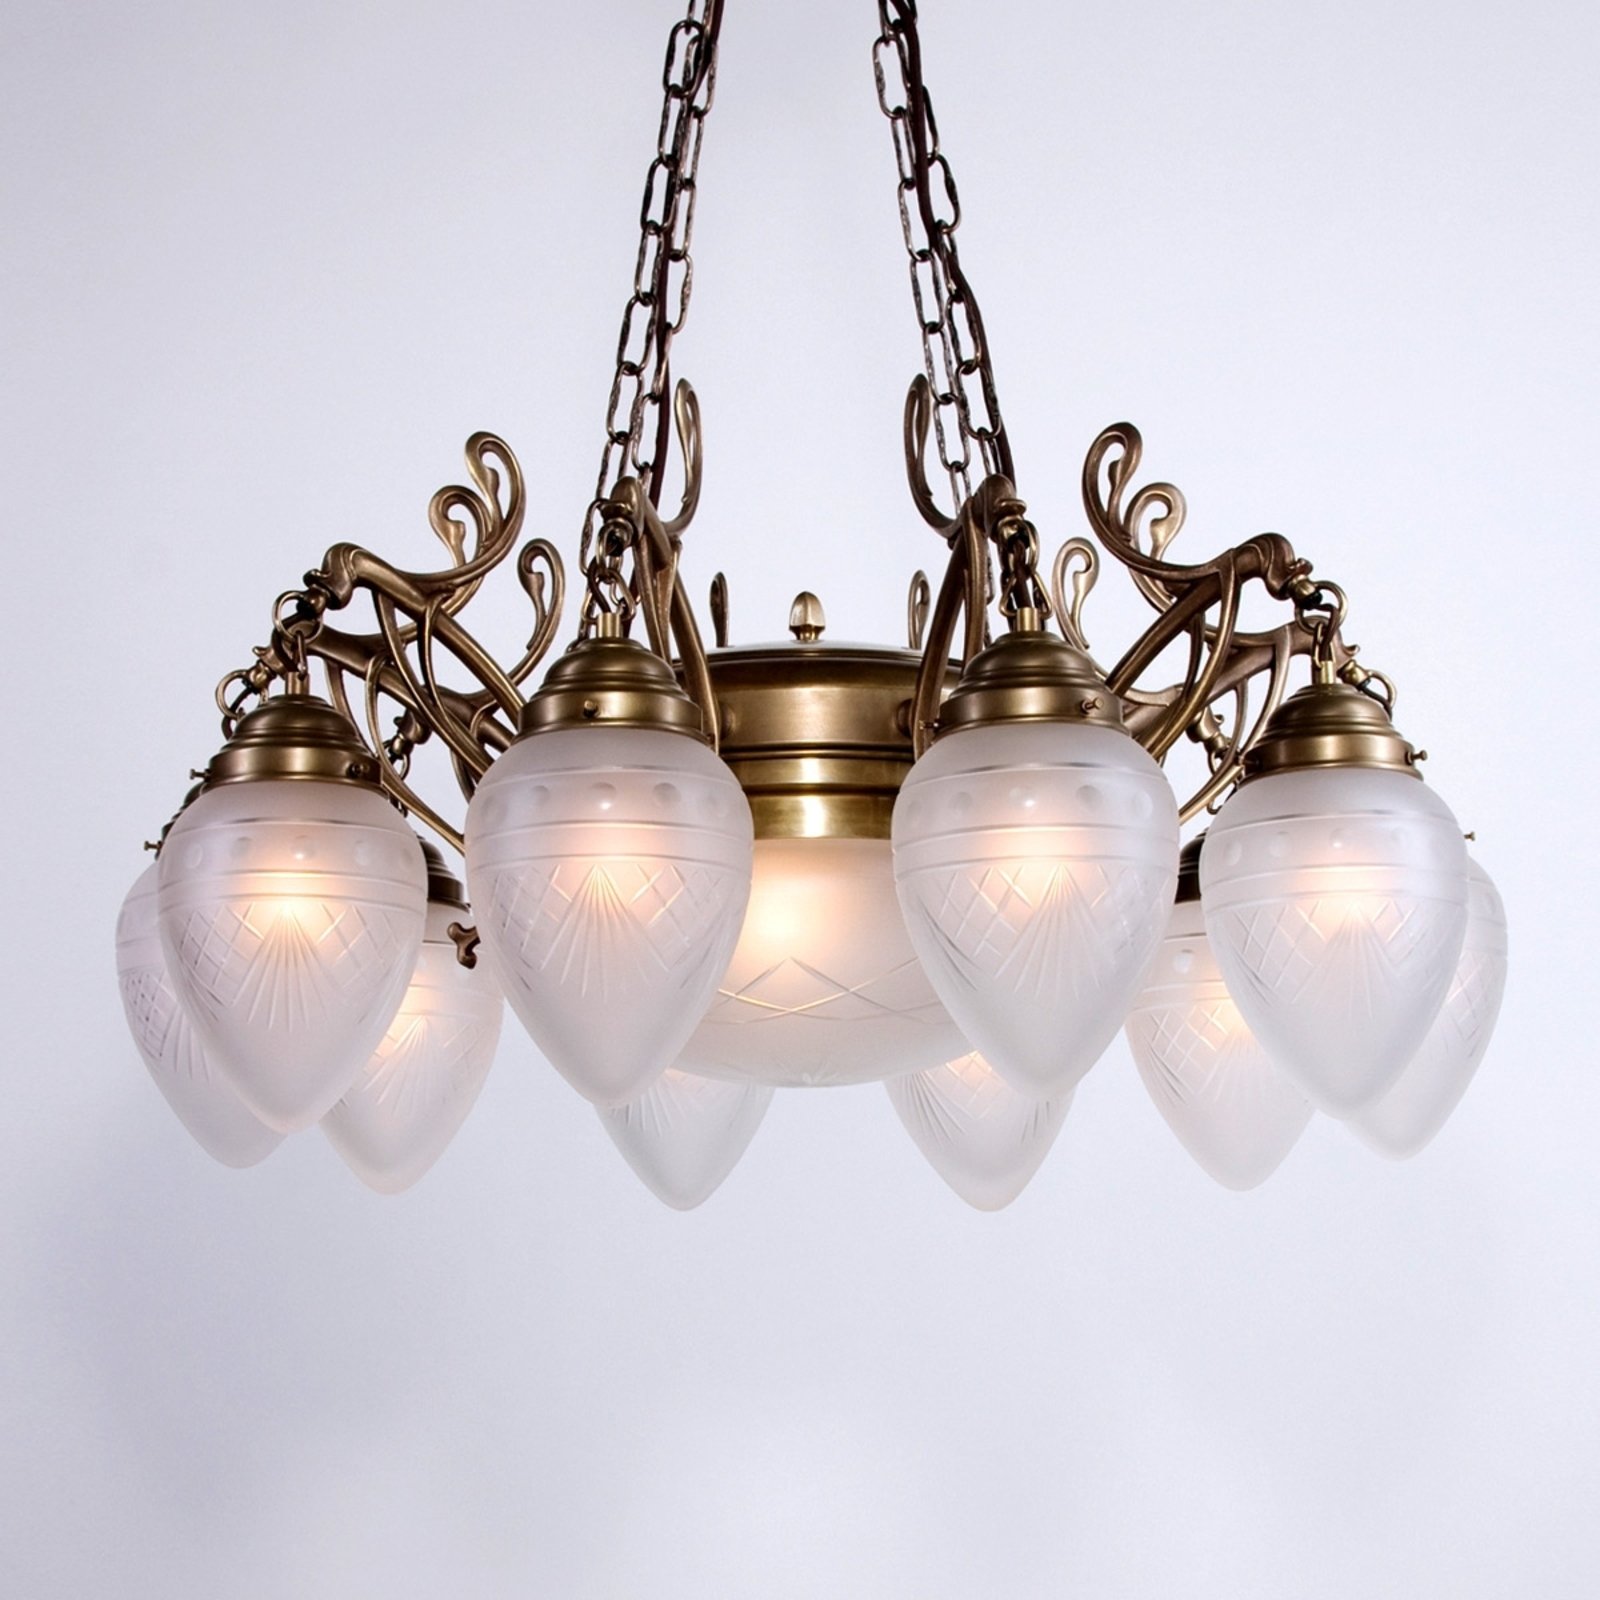 Jerome chandelier, hand-finished